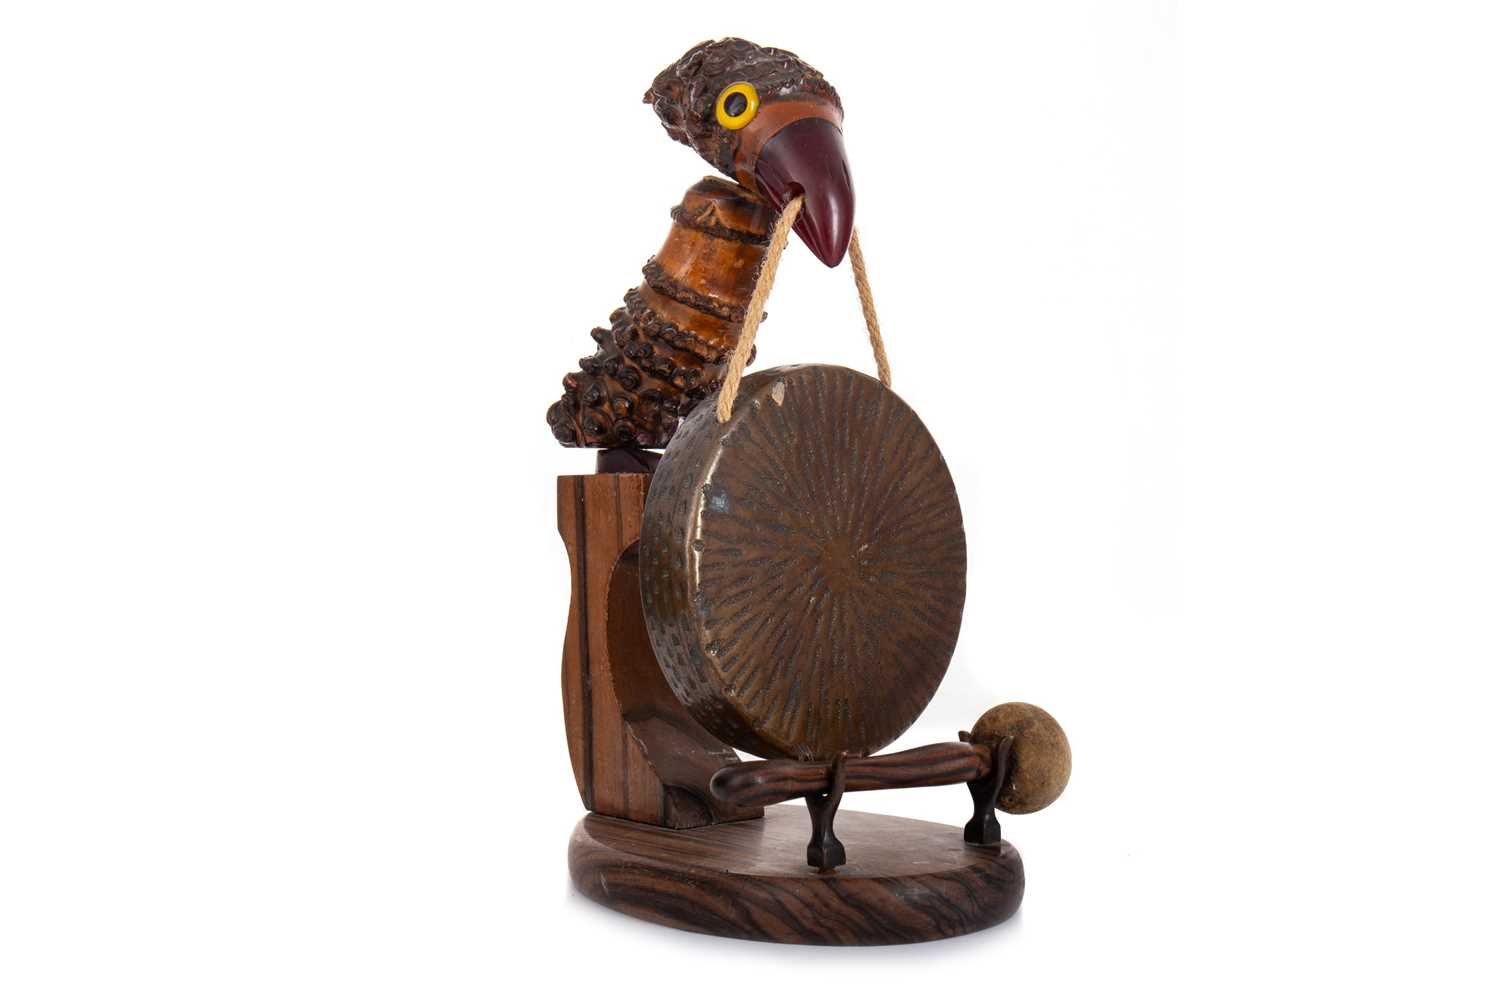 HENRY HOWELL & CO. FOR ALFRED DUNHILL, YZ BIRD TABLE GONG, CIRCA 1920-30